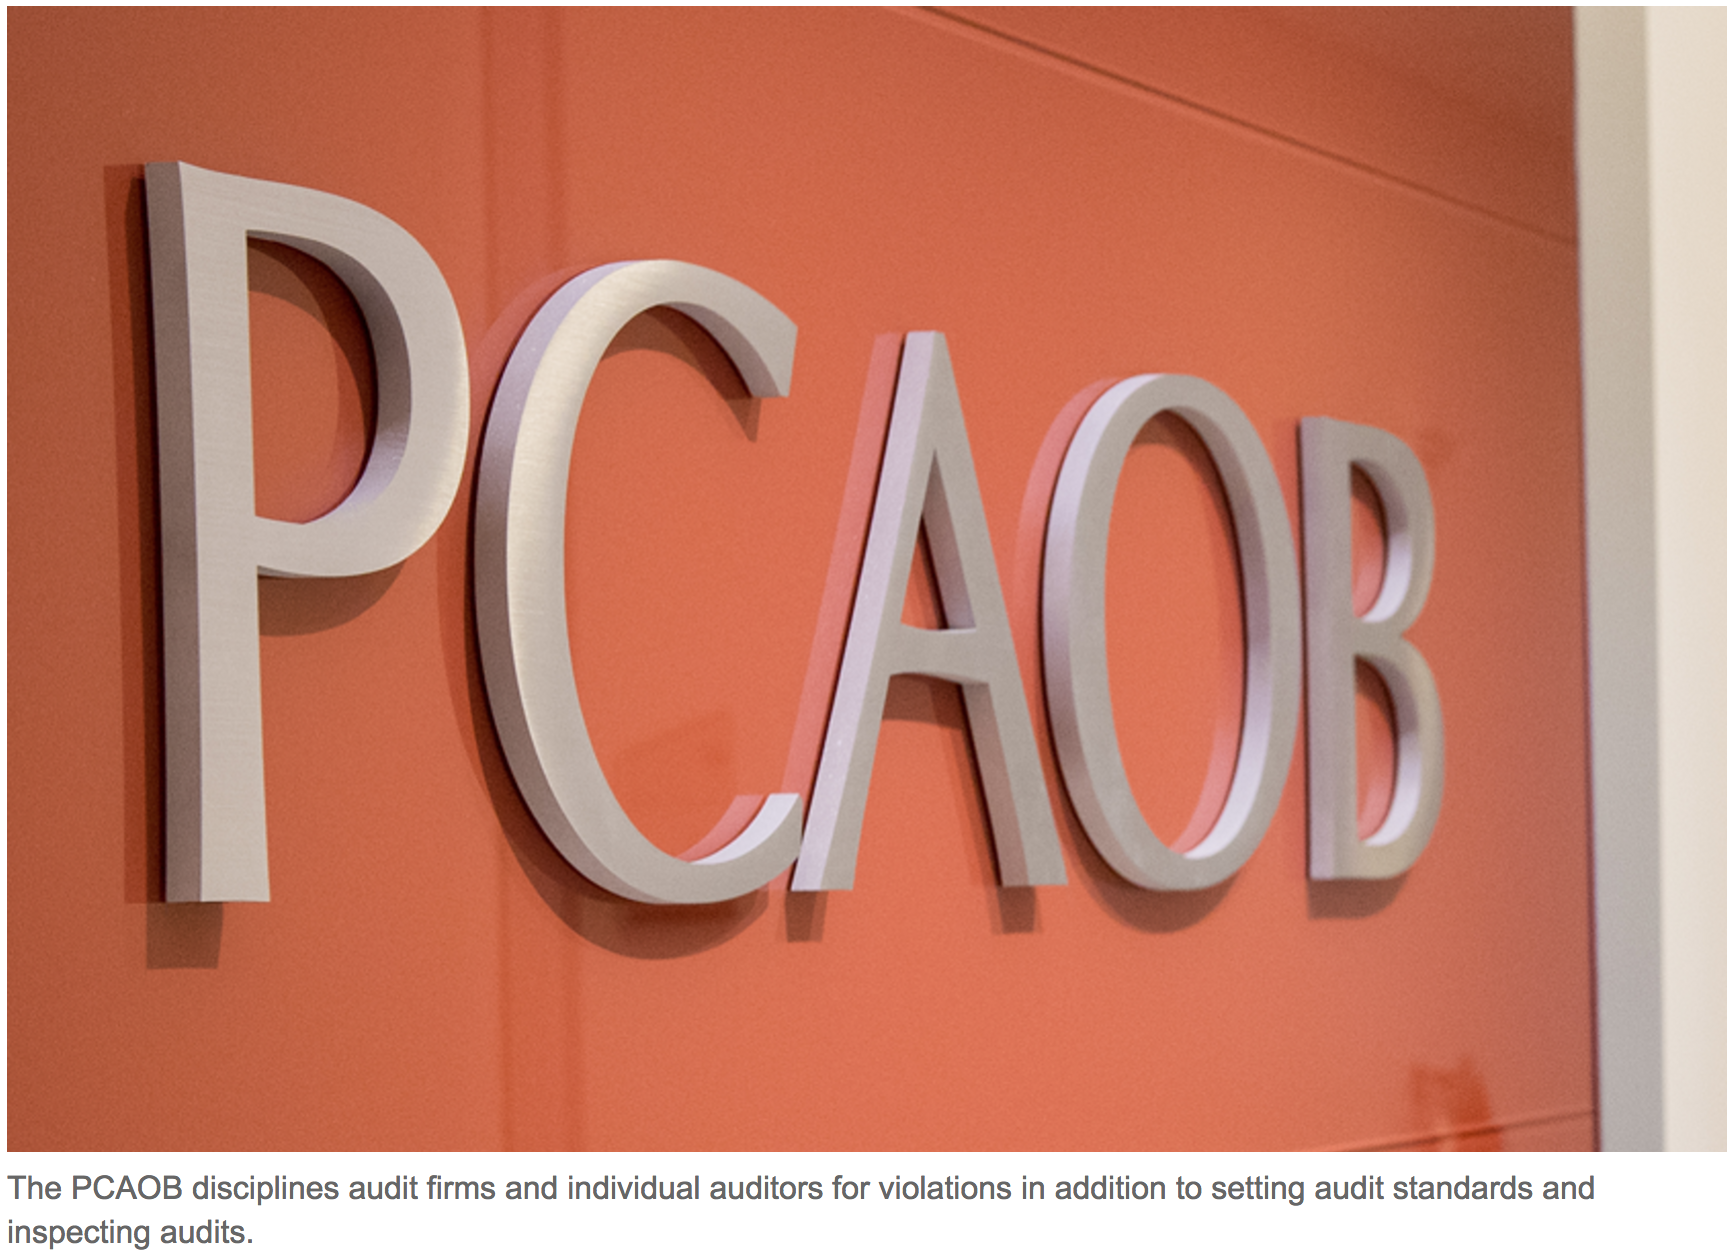 Big (4) Audit Firms Blasted By PCAOB And Gary Gensler, Head Of SEC (#GotBitcoin)